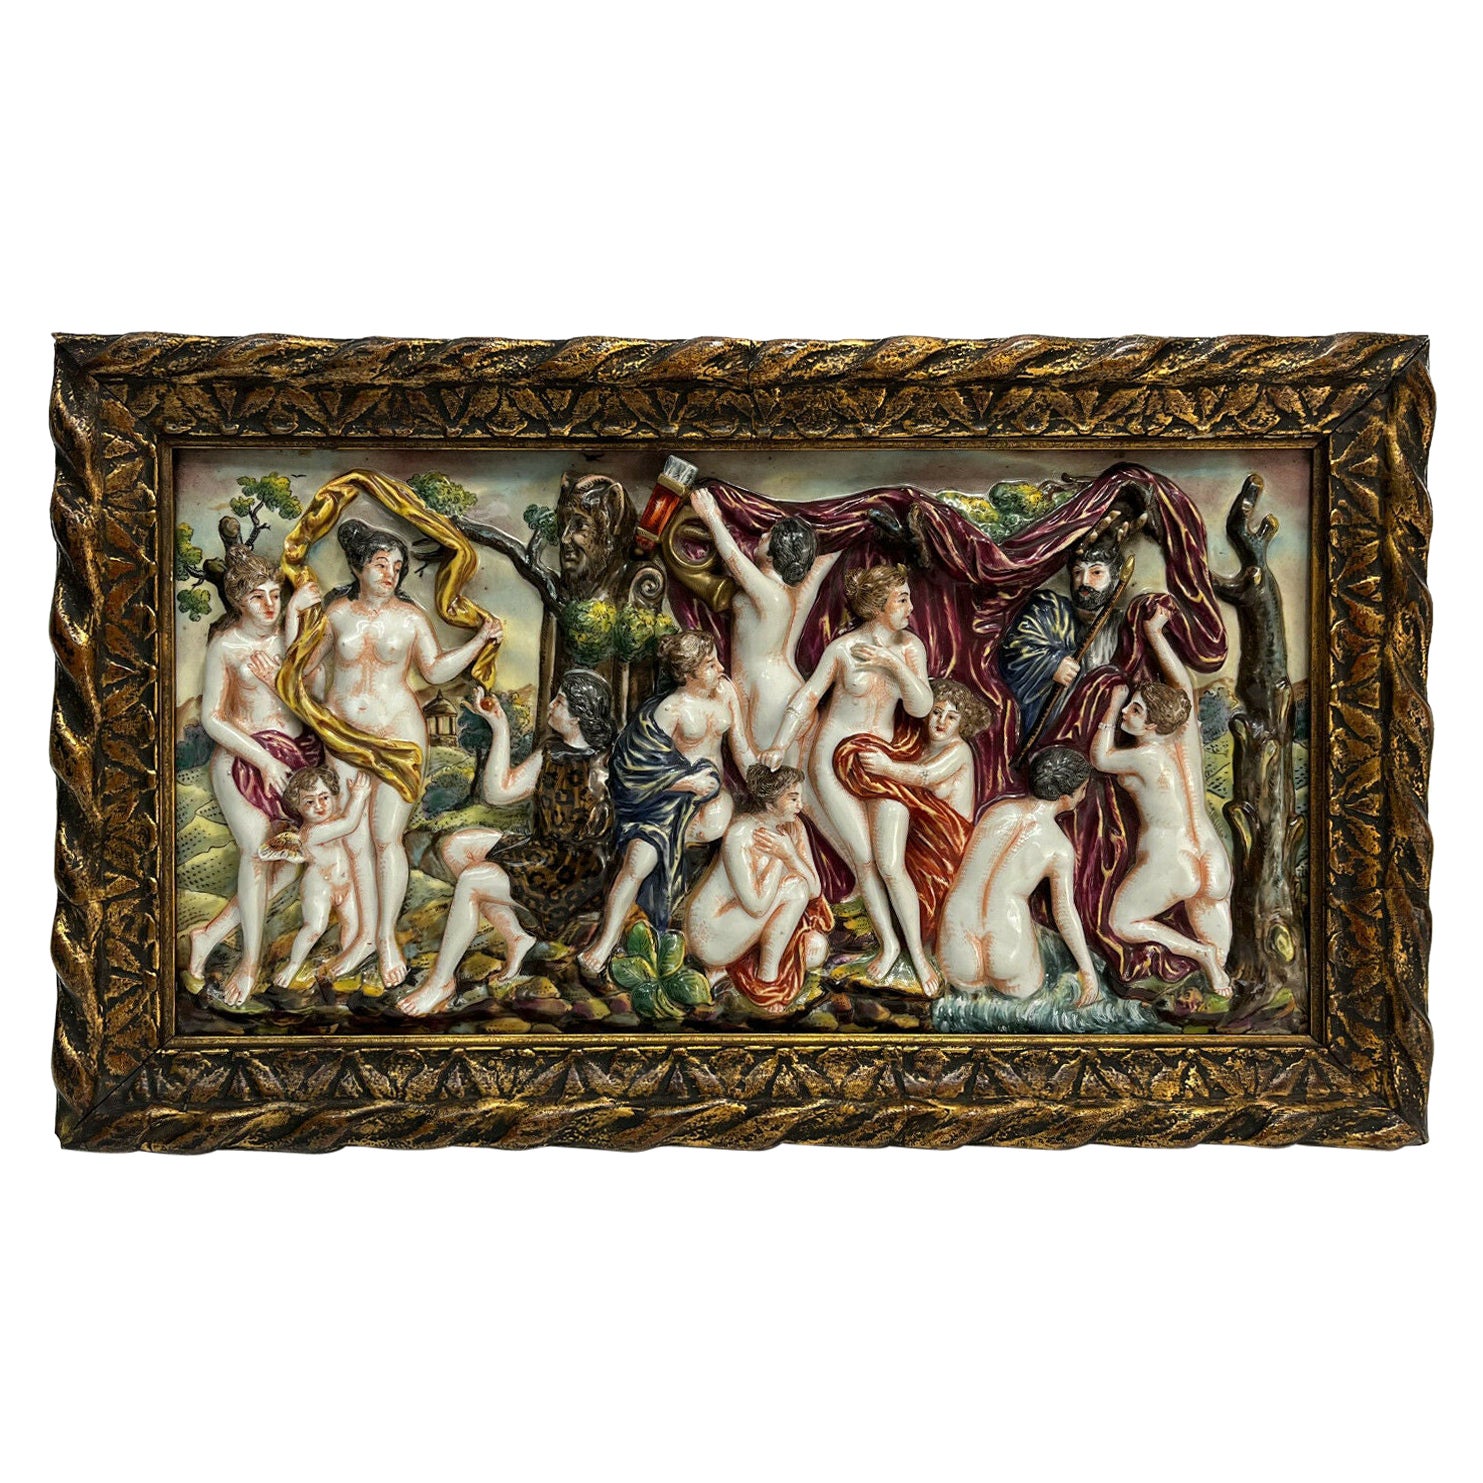 Capodimonte Porcelain High Relief Plaque after Peter Paul Rubens, Diana & Nymphs For Sale